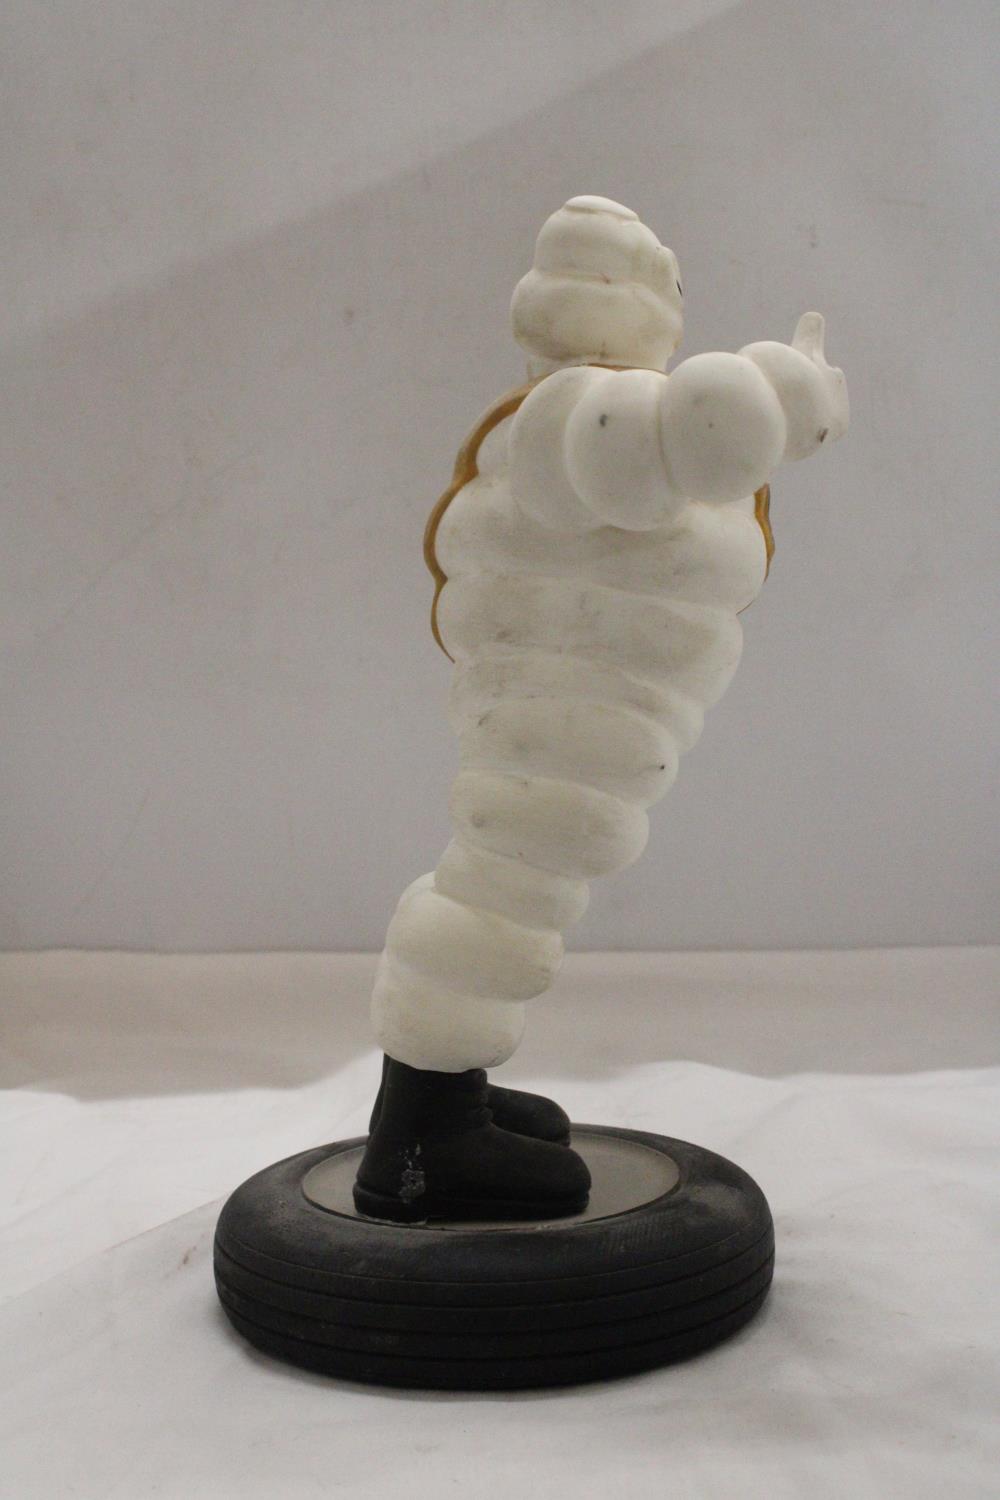 A VINTAGE ORIGINAL MICHELIN MAN ON TYRE APPROXIMATELY 33 CM HIGH - Image 5 of 5